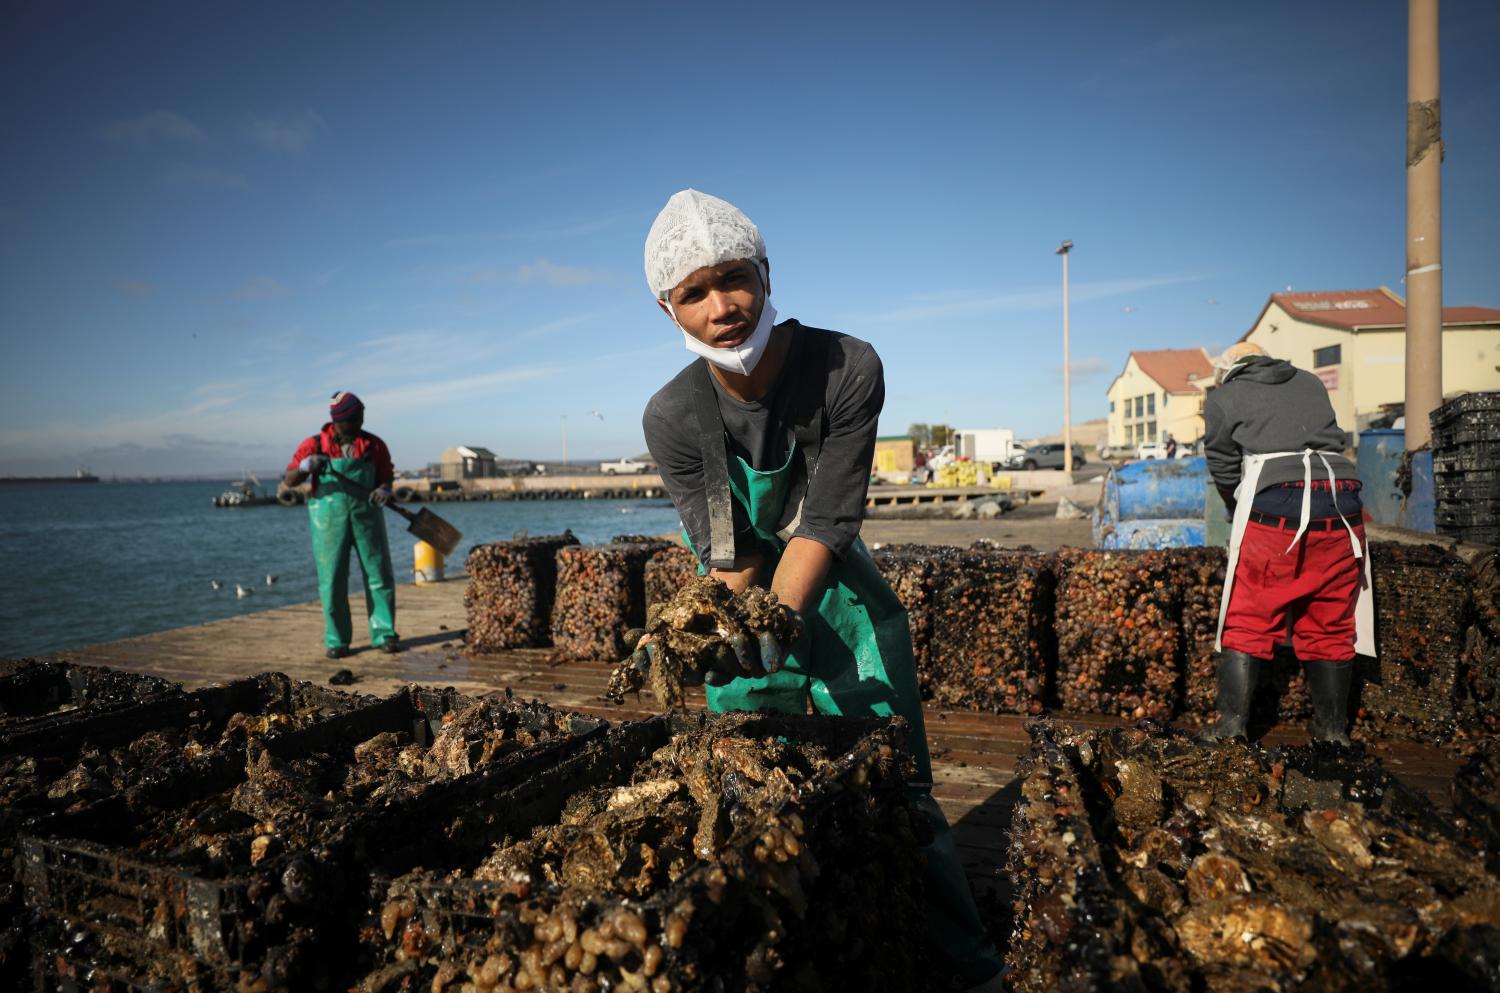 A worker cleans mussels farmed on aquaculture rafts in Saldanha Bay near Cape Town, South Africa, June 15, 2021. Picture taken June 15, 2021. REUTERS/Mike Hutchings